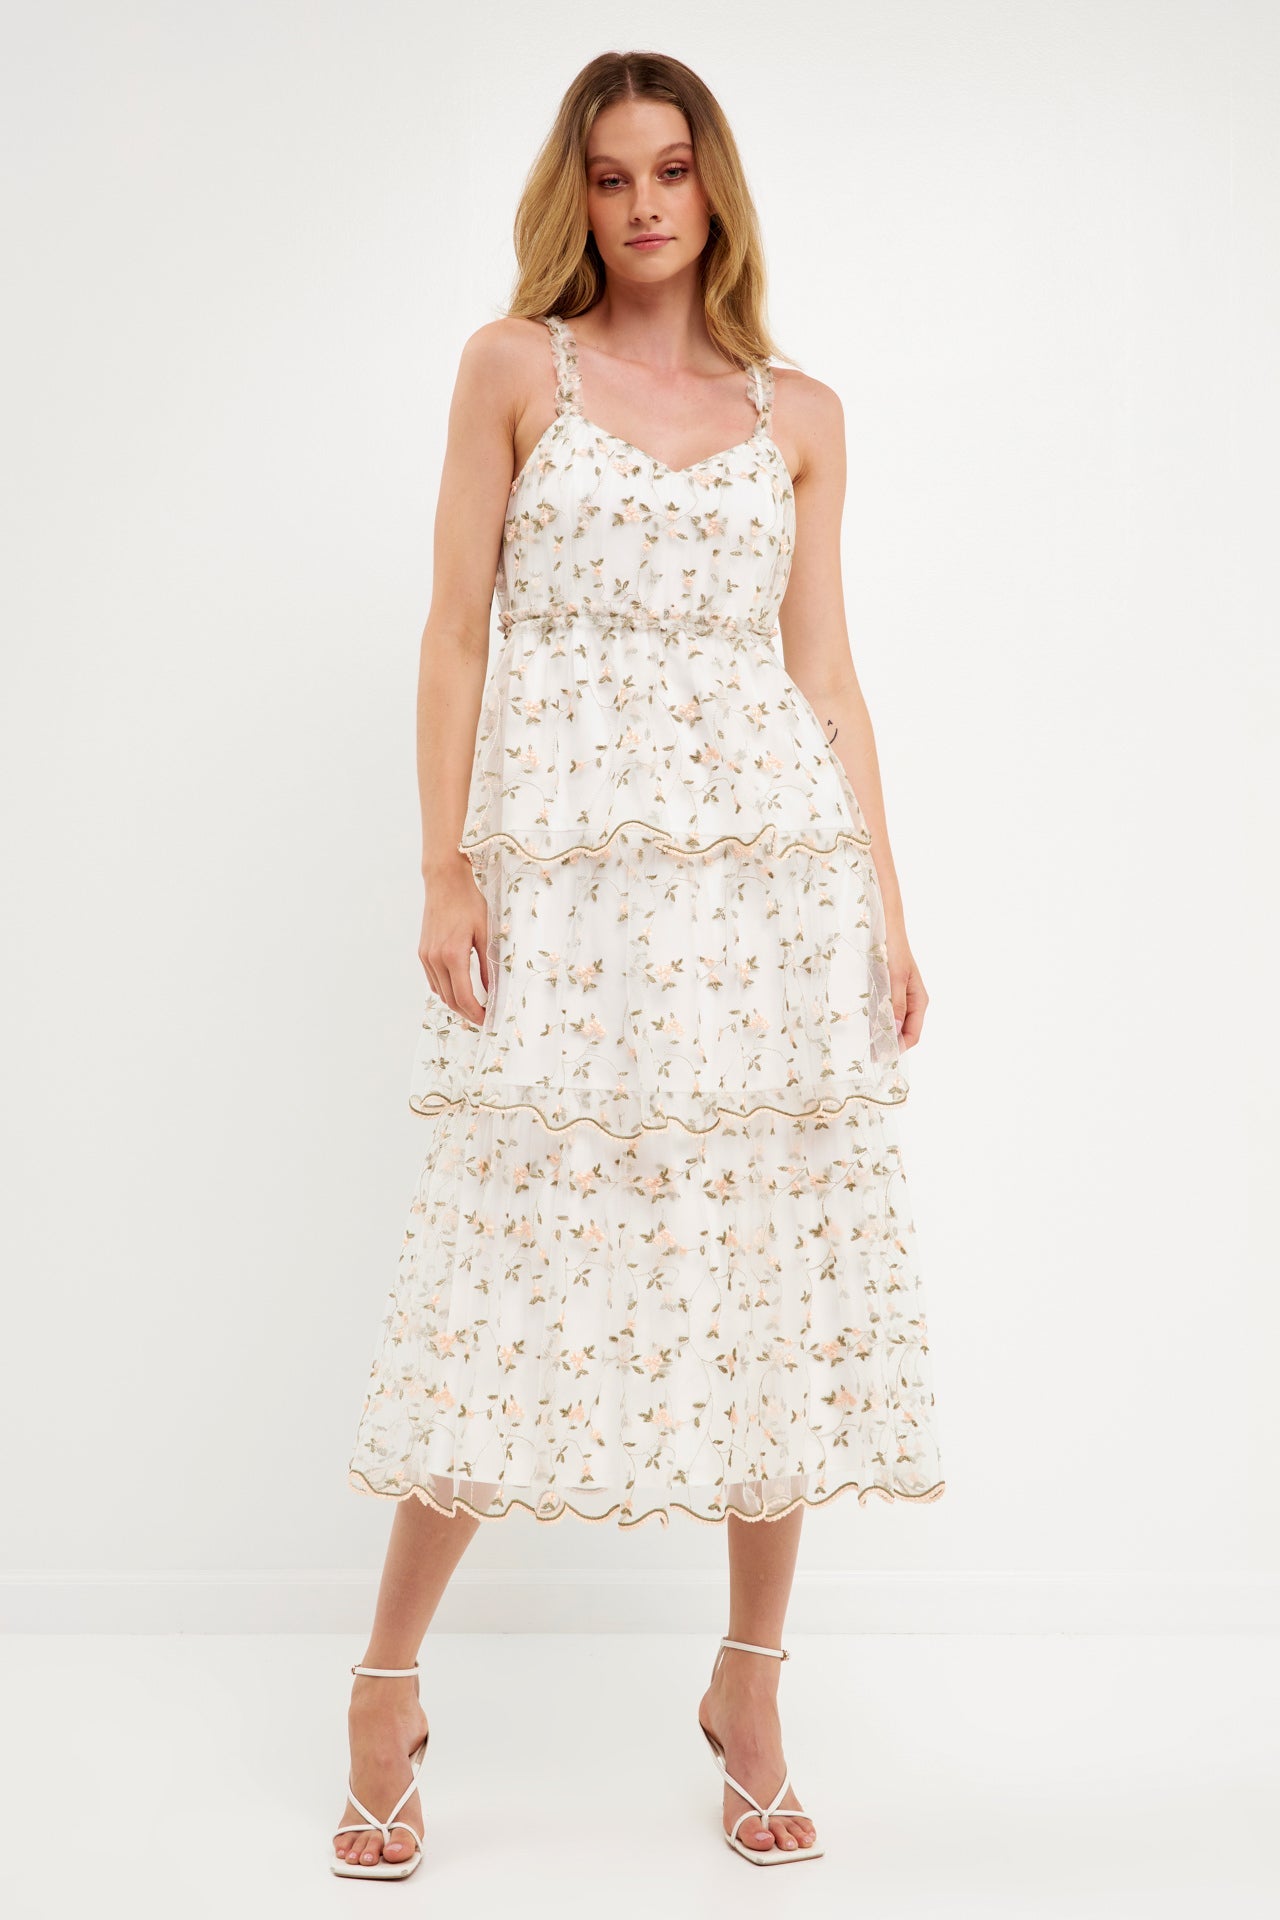 Endless Rose - Floral Embroidery Scalloped Hem Tiered Dress - Dresses in Women's Clothing available at endlessrose.com